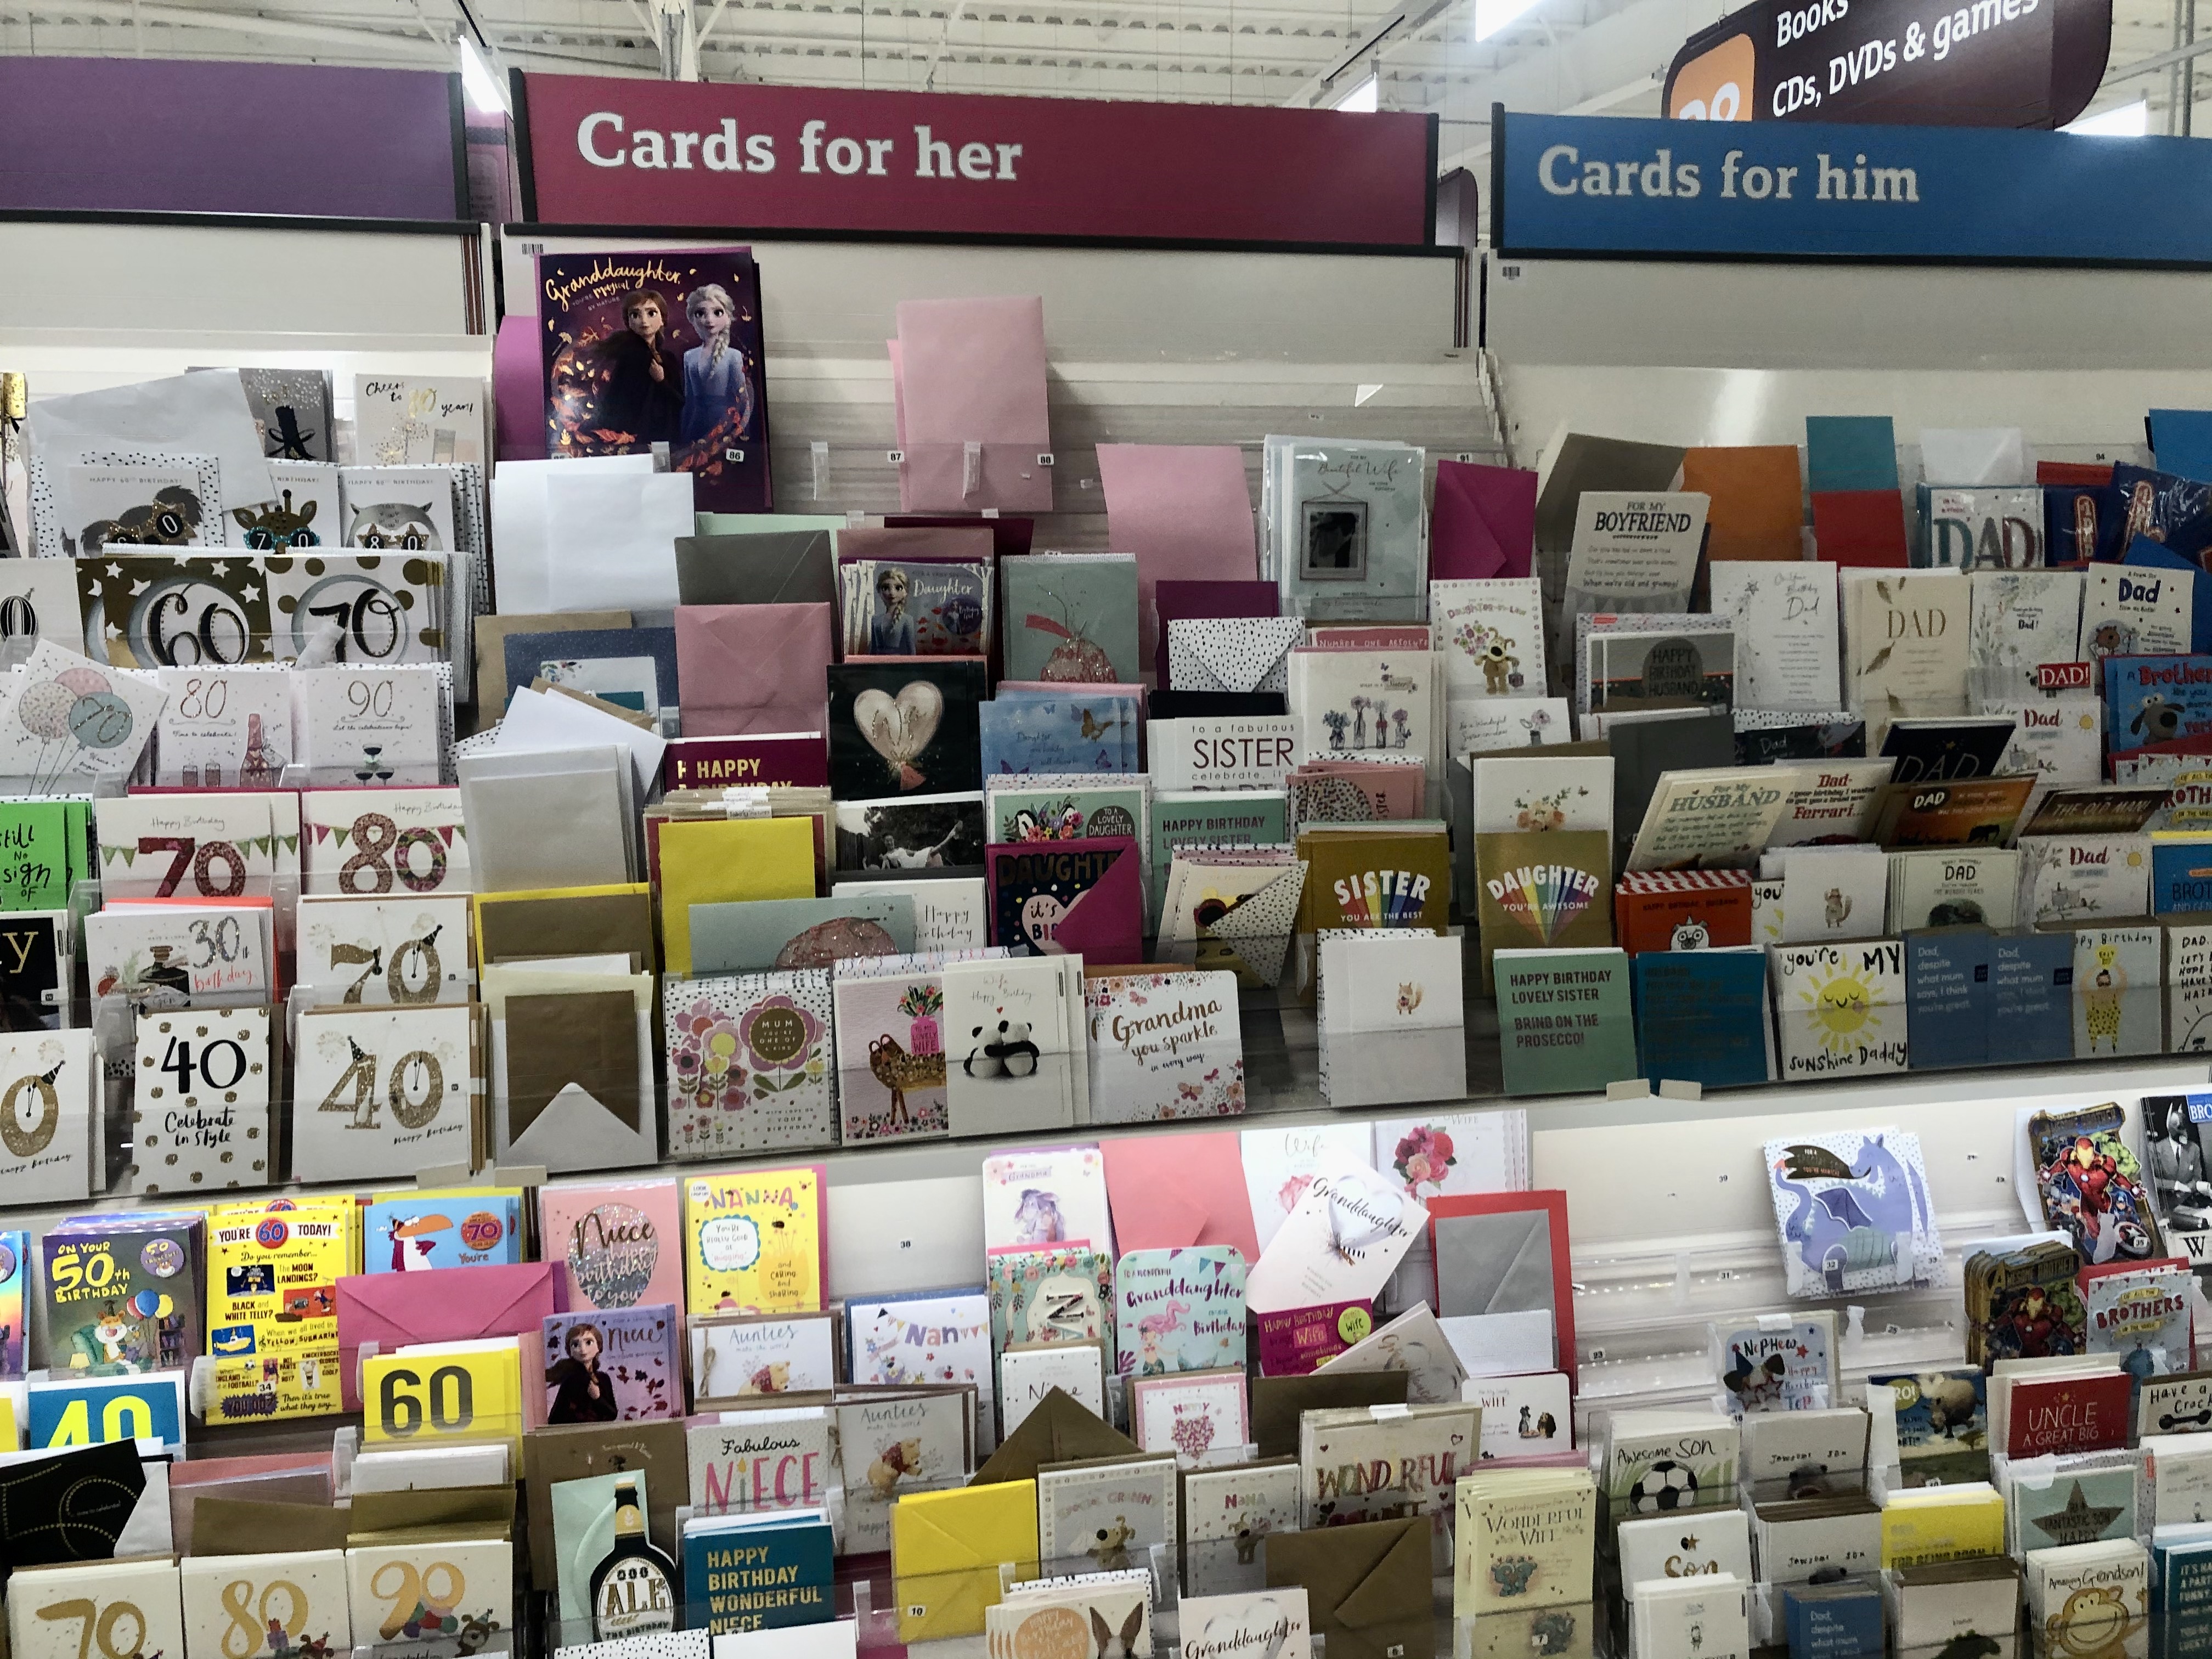 Above: Sainsbury’s admits it has benefitted from increased demand for its cards over the last four months, which has taken its toll on the merchandising of the displays.